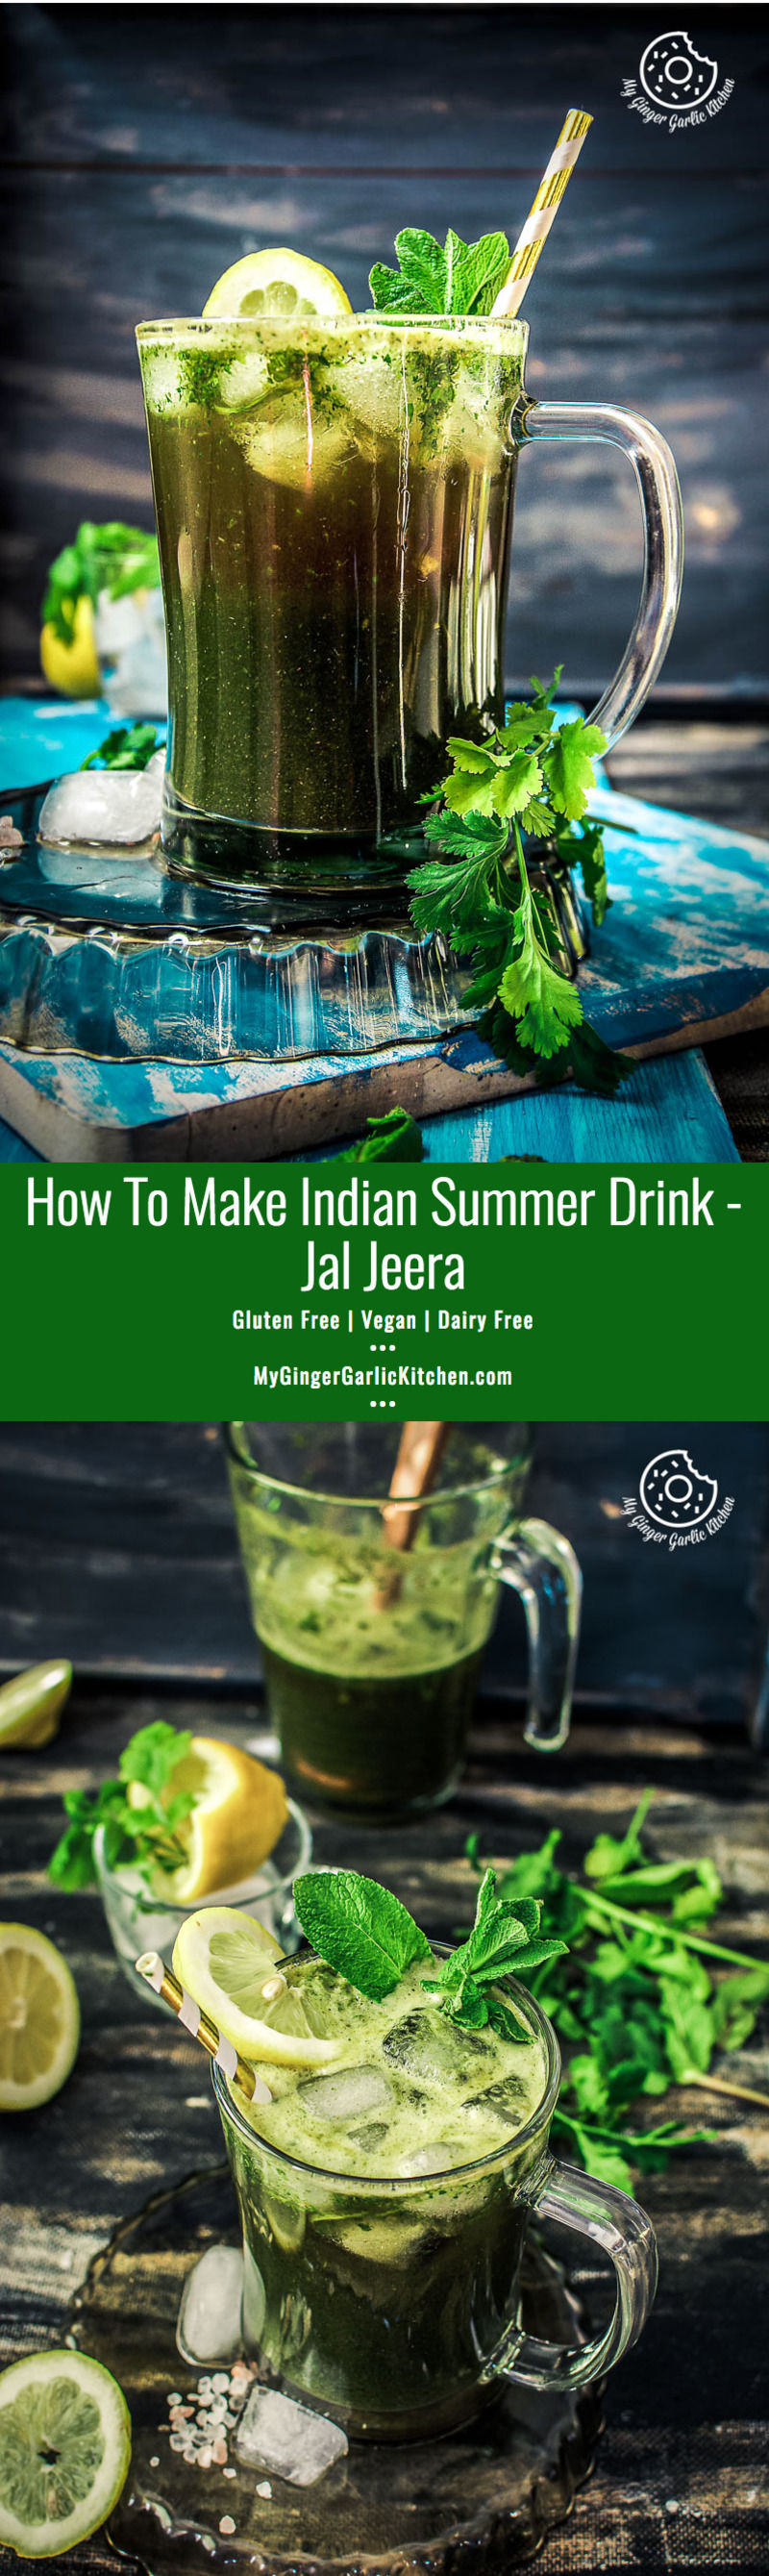 a close up of a glass of green drink jal jeera with lemons and mint